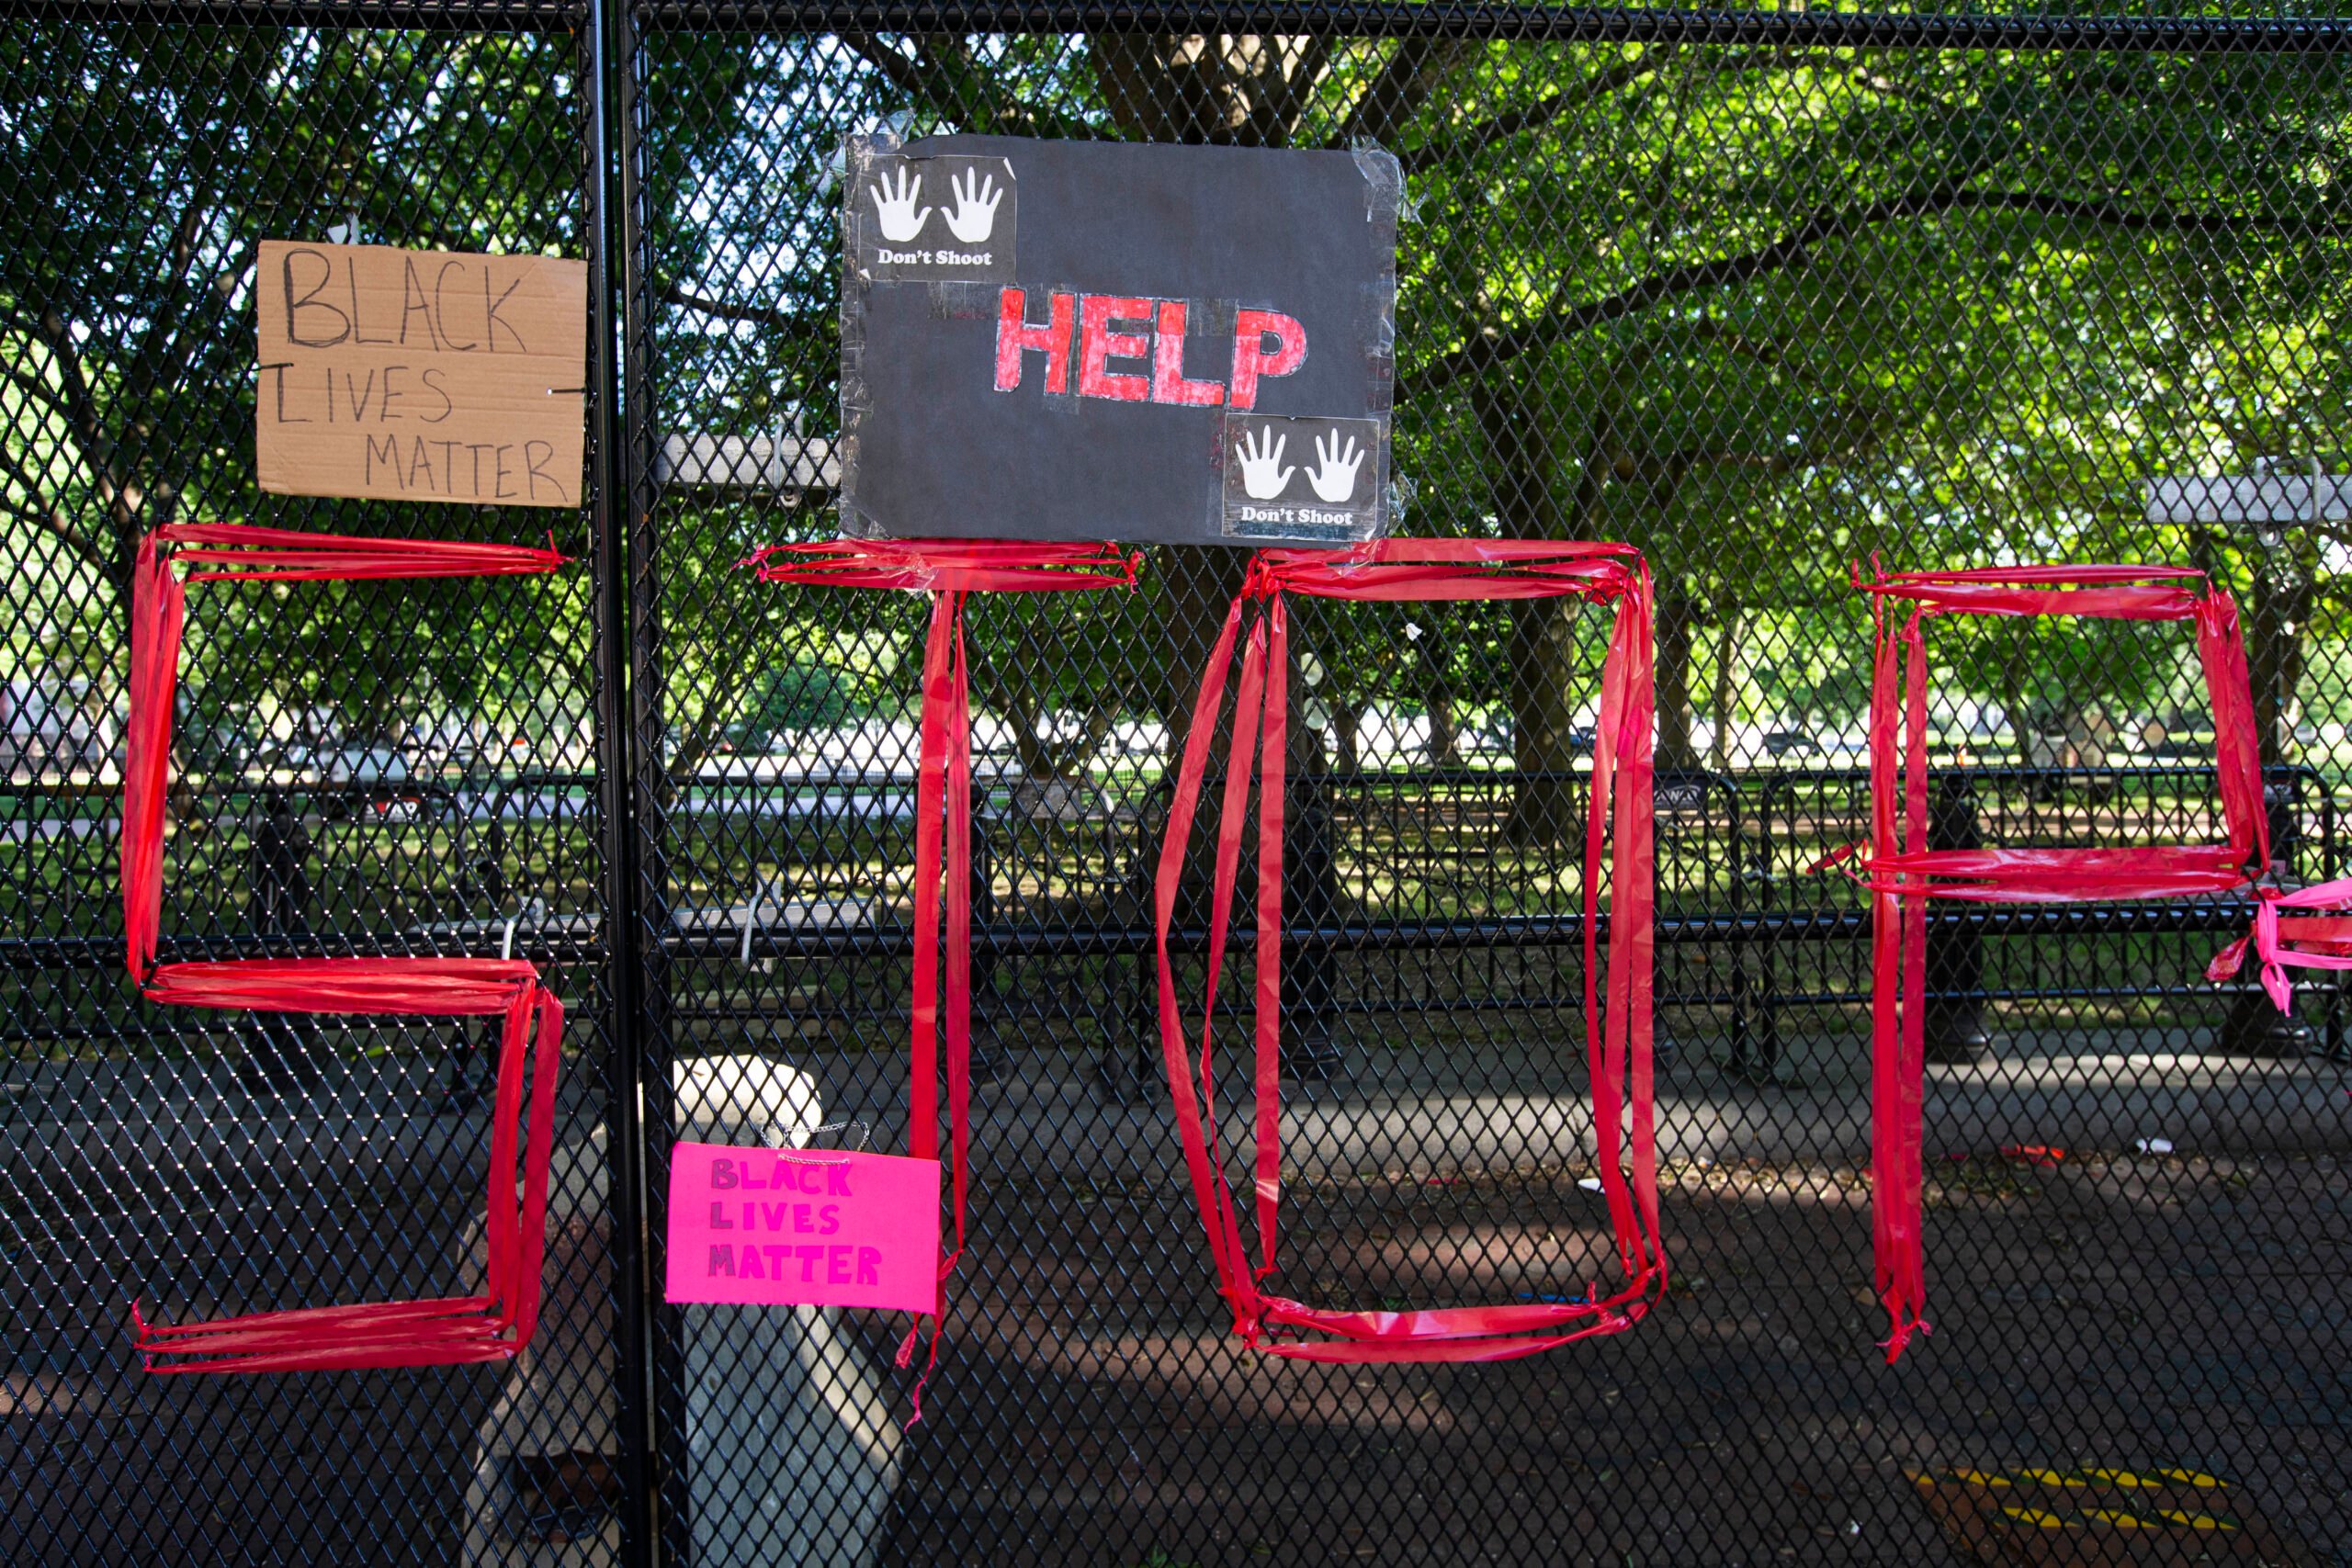 Signs are left in front of the White House's recently erected security fence now turned into a memorial against police brutality and the death of George Floyd, during a peaceful protest on June 7, 2020 in Washington, DC. - On May 25, 2020, Floyd, a 46-year-old black man suspected of passing a counterfeit $20 bill, died in Minneapolis after Derek Chauvin, a white police officer, pressed his knee to Floyd's neck for almost nine minutes. (Photo by Jose Luis Magana / AFP) (Photo by JOSE LUIS MAGANA/AFP via Getty Images)